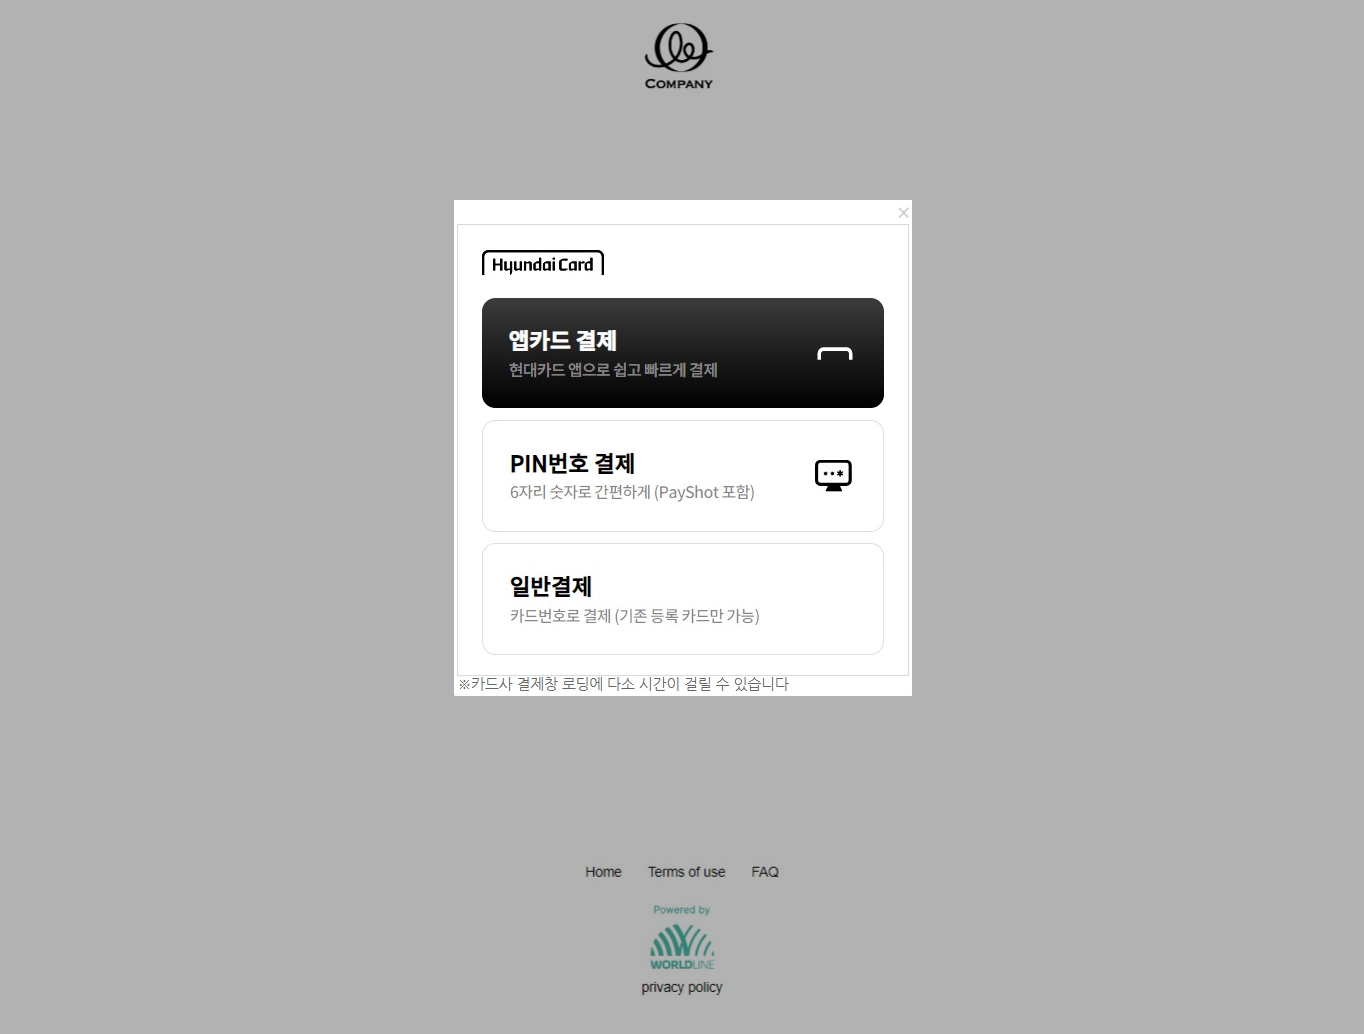 hyundai-card-authenticated-consumer-experience-desktop-flow-with-installments-03